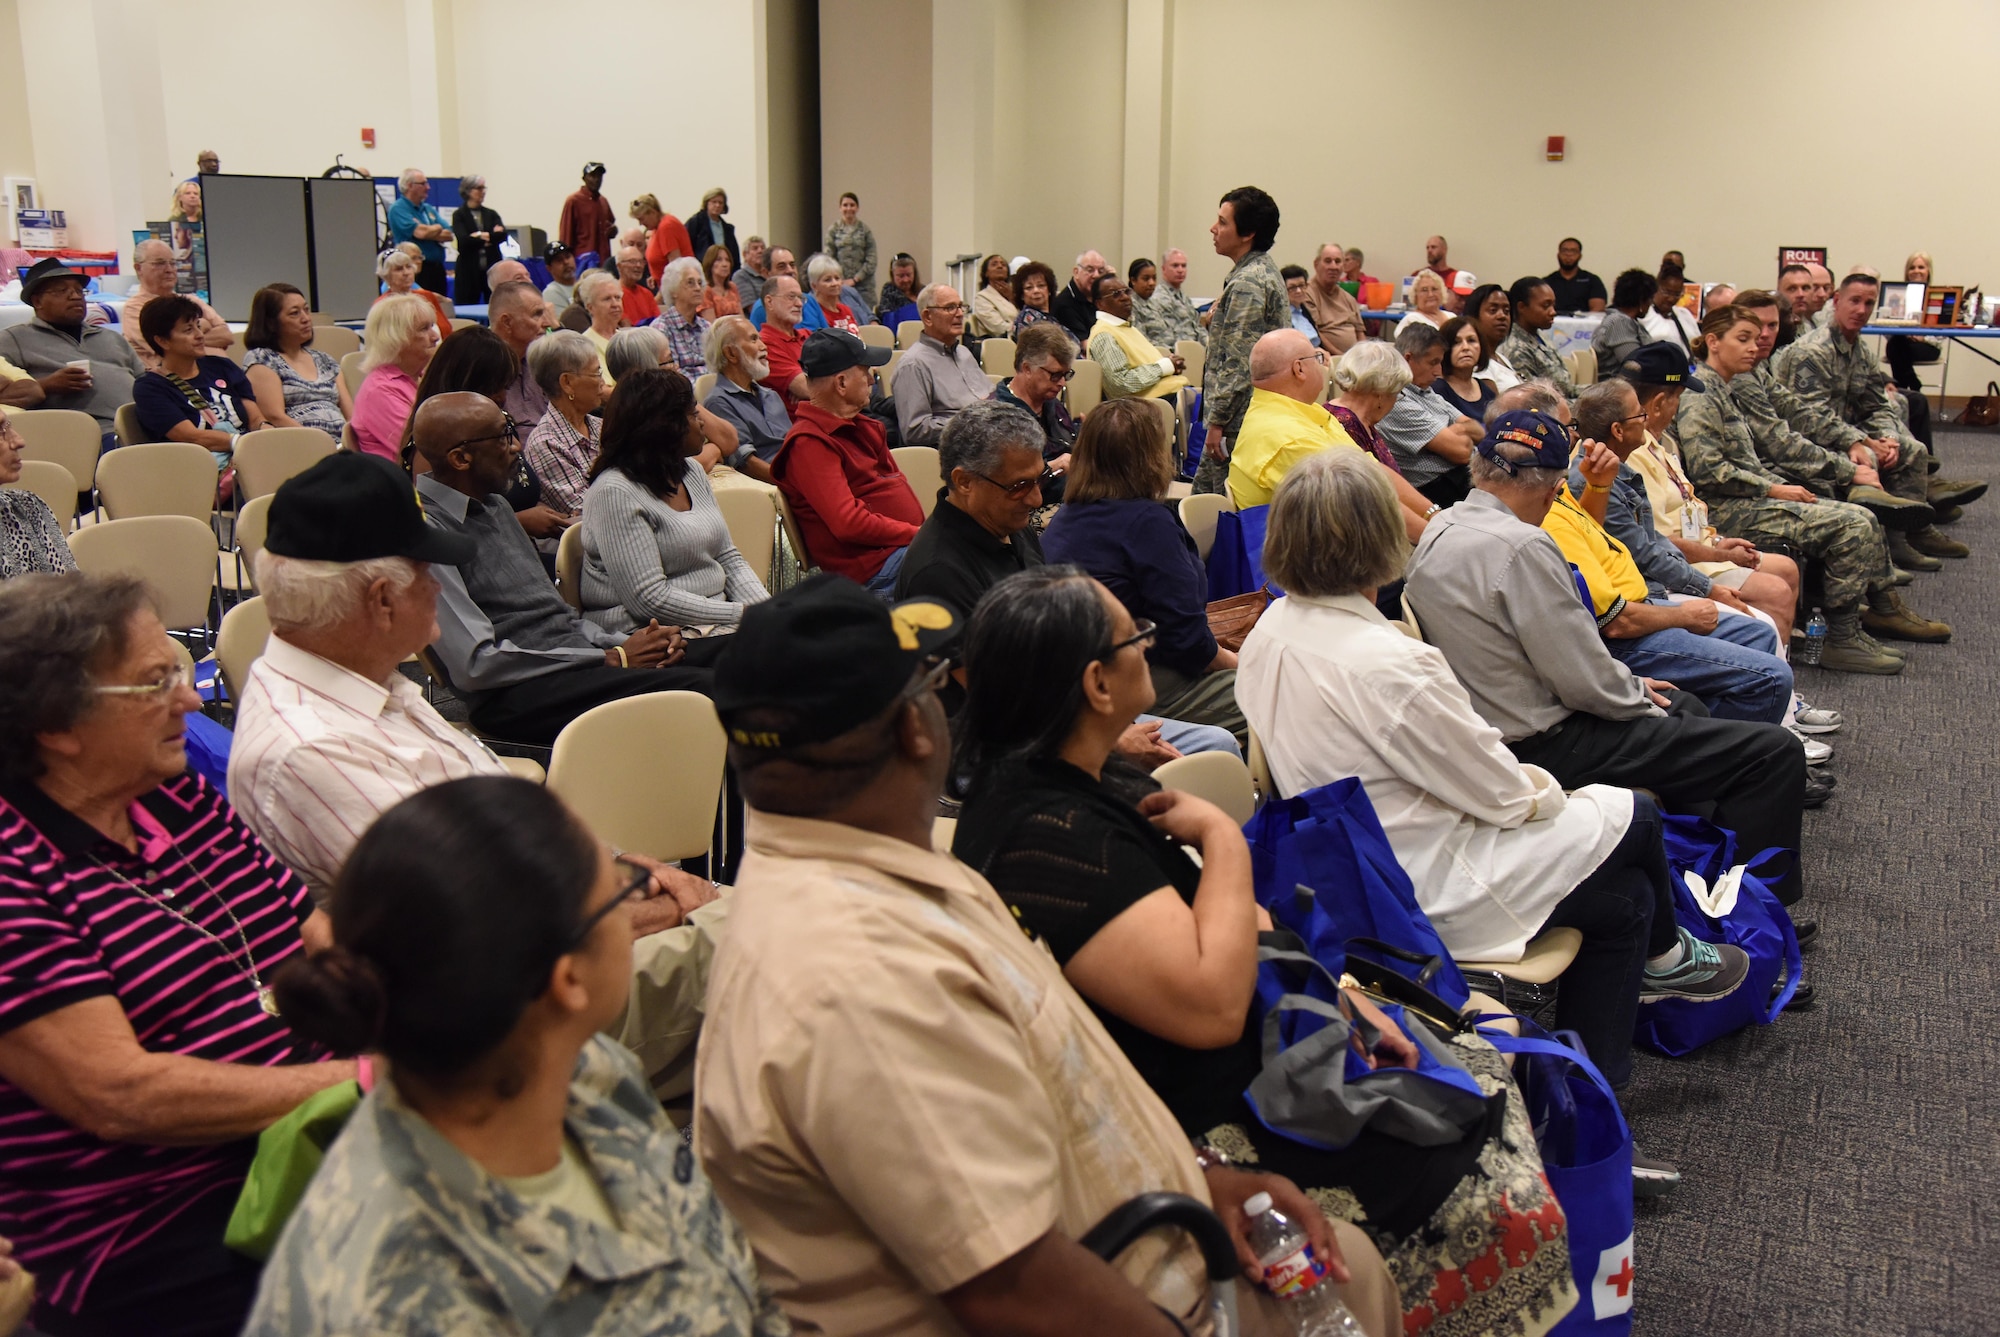 Col. Jeannine Ryder, 81st Medical Group commander, briefs retirees on Keesler Medical Center benefits during Retiree Appreciation Day at the Roberts Consolidated Aircraft Maintenance Facility Nov. 4, 2016, on Keesler Air Force Base, Miss. The annual event, sponsored by the Keesler Retiree Activities Office, included more than 20 displays with information pertinent to retirees and a free lunch. (U.S. Air Force photo by Kemberly Groue/Released)